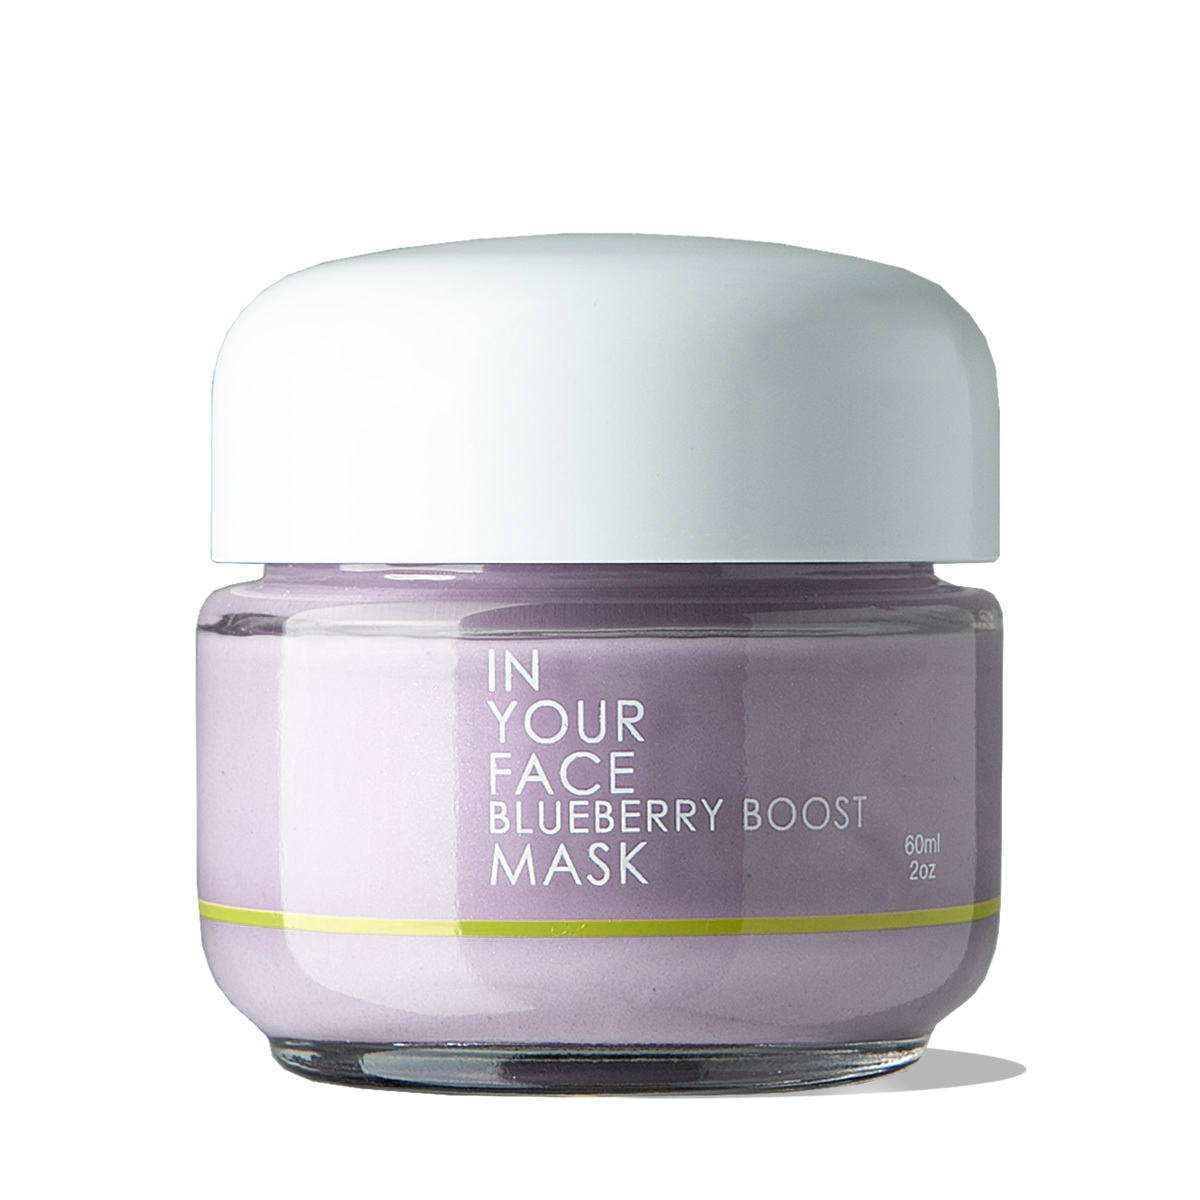 a jar of the IN YOUR FACE BLUEBERRY BOOST MASK on a white background. A light lilac-colored mask with a white lid.